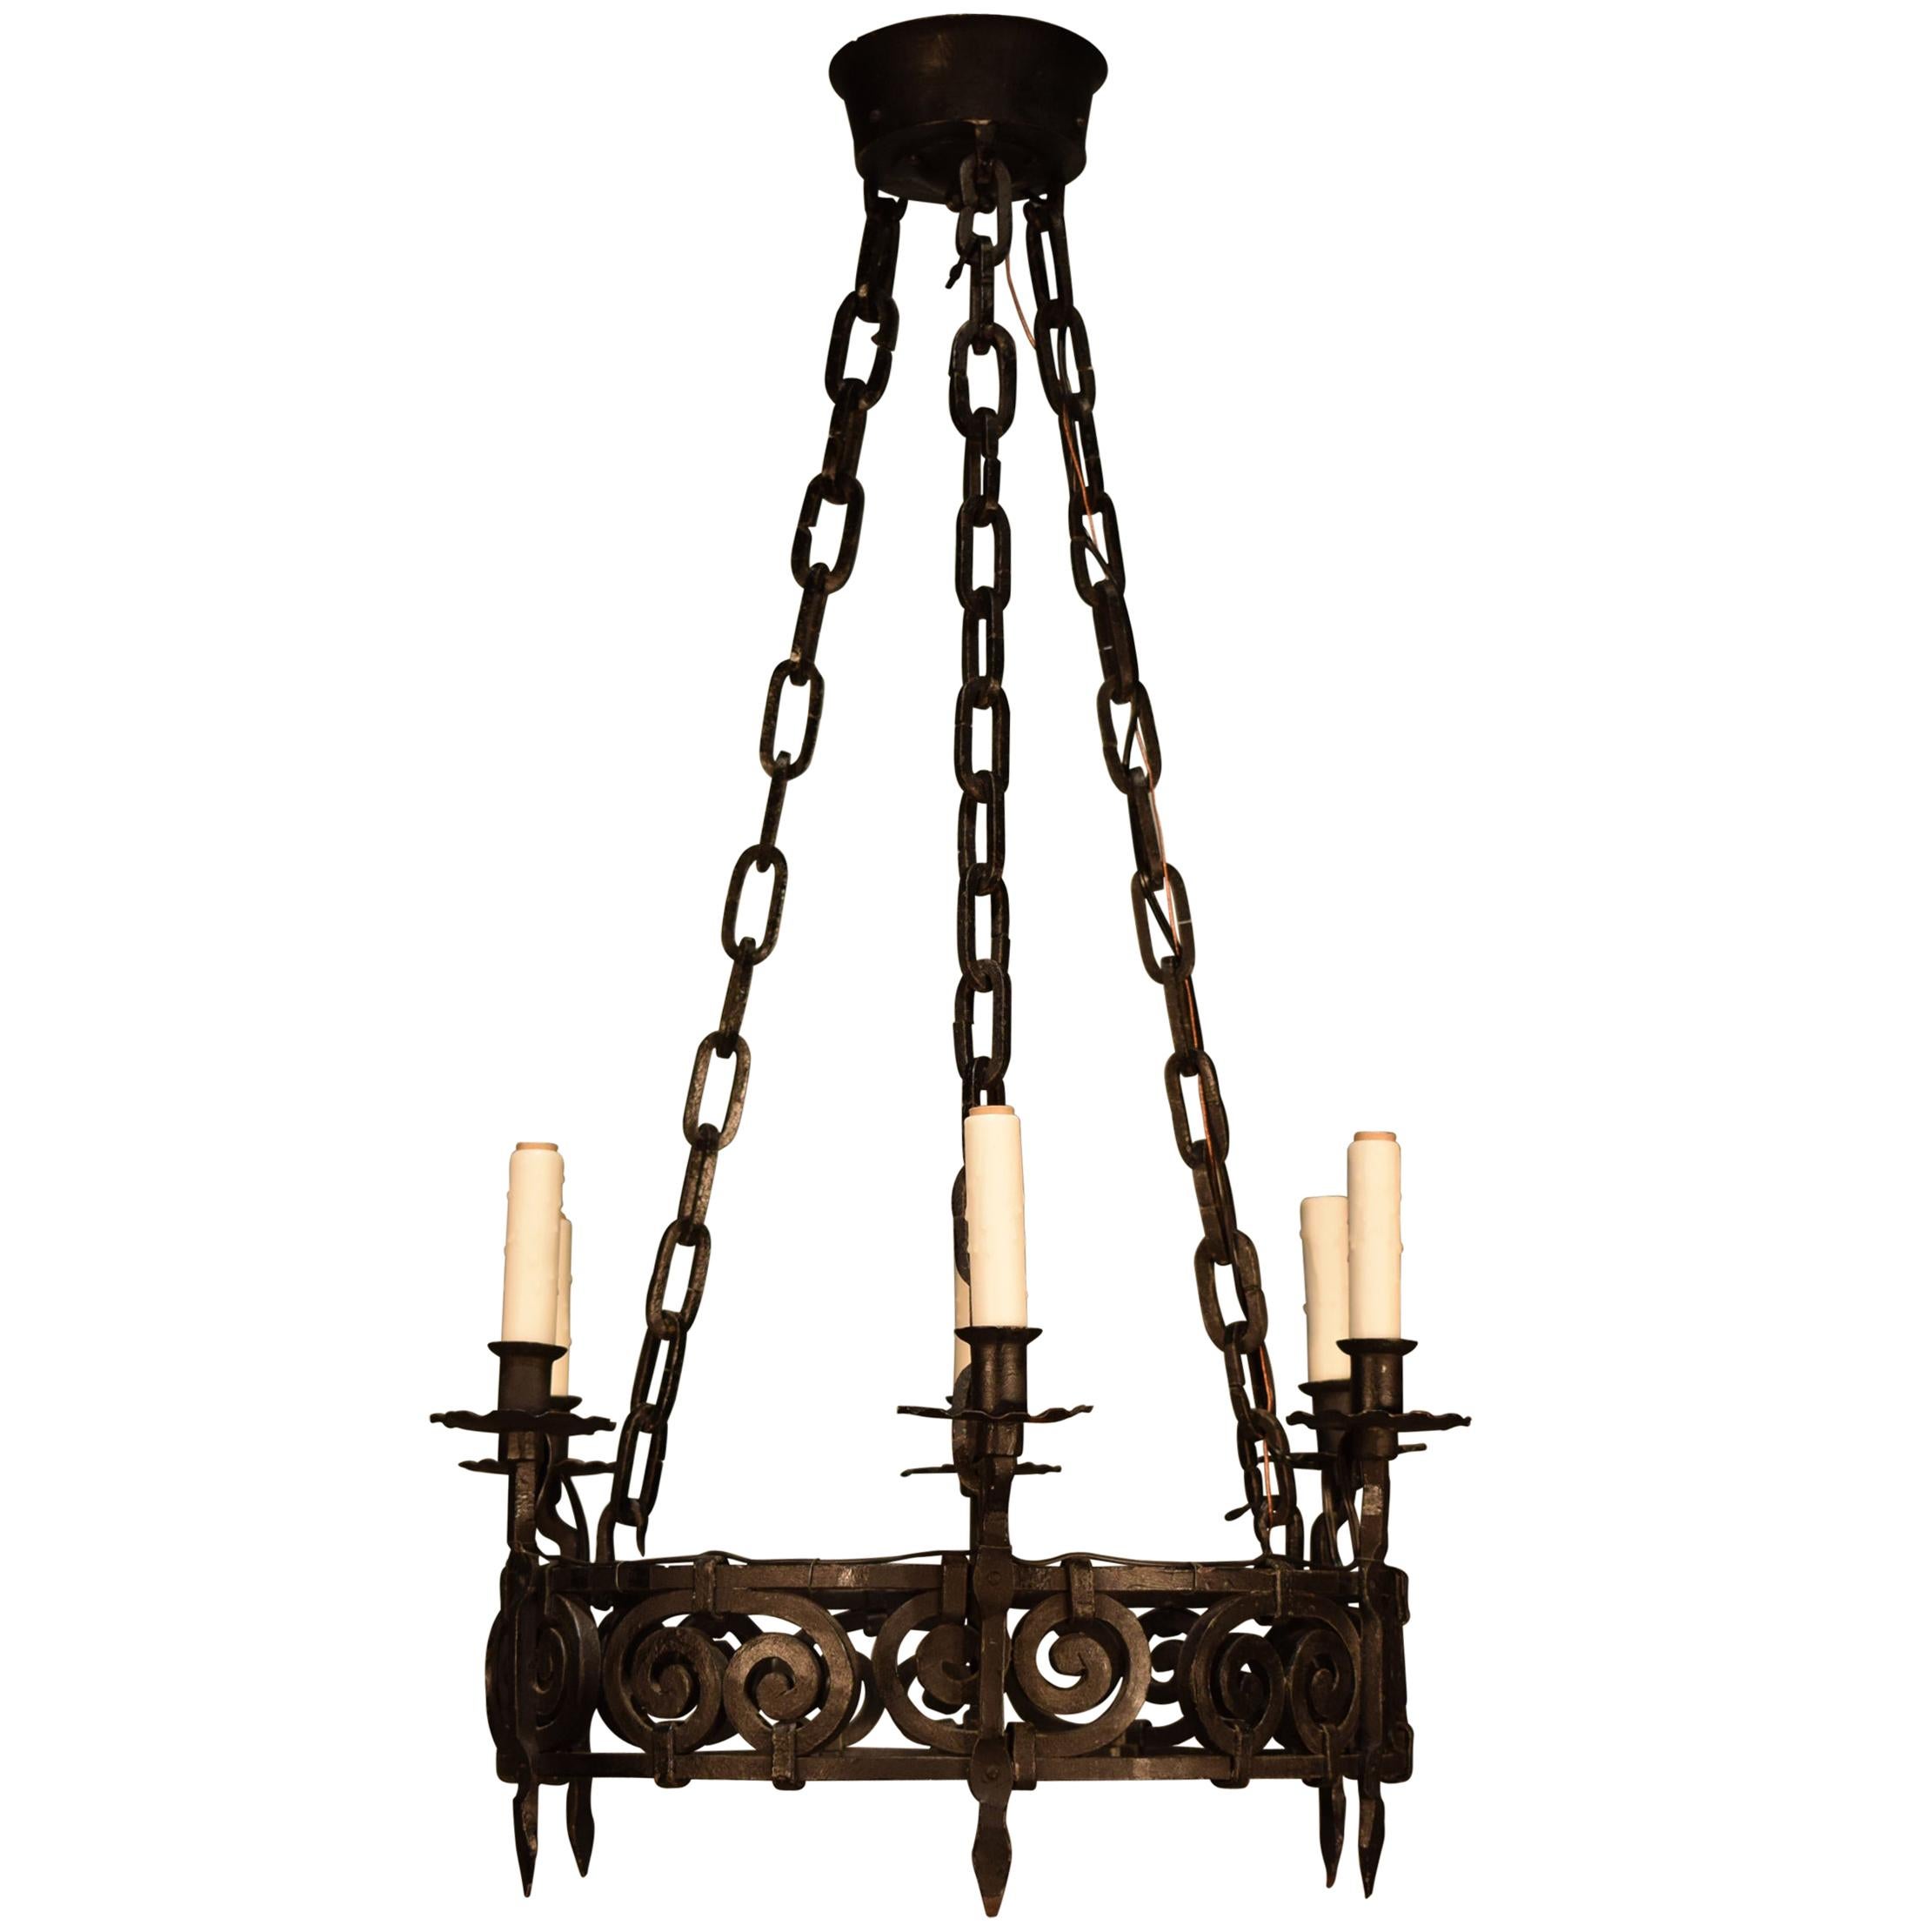 Very Fine French Provincial Iron Chandelier. France, circa 1900